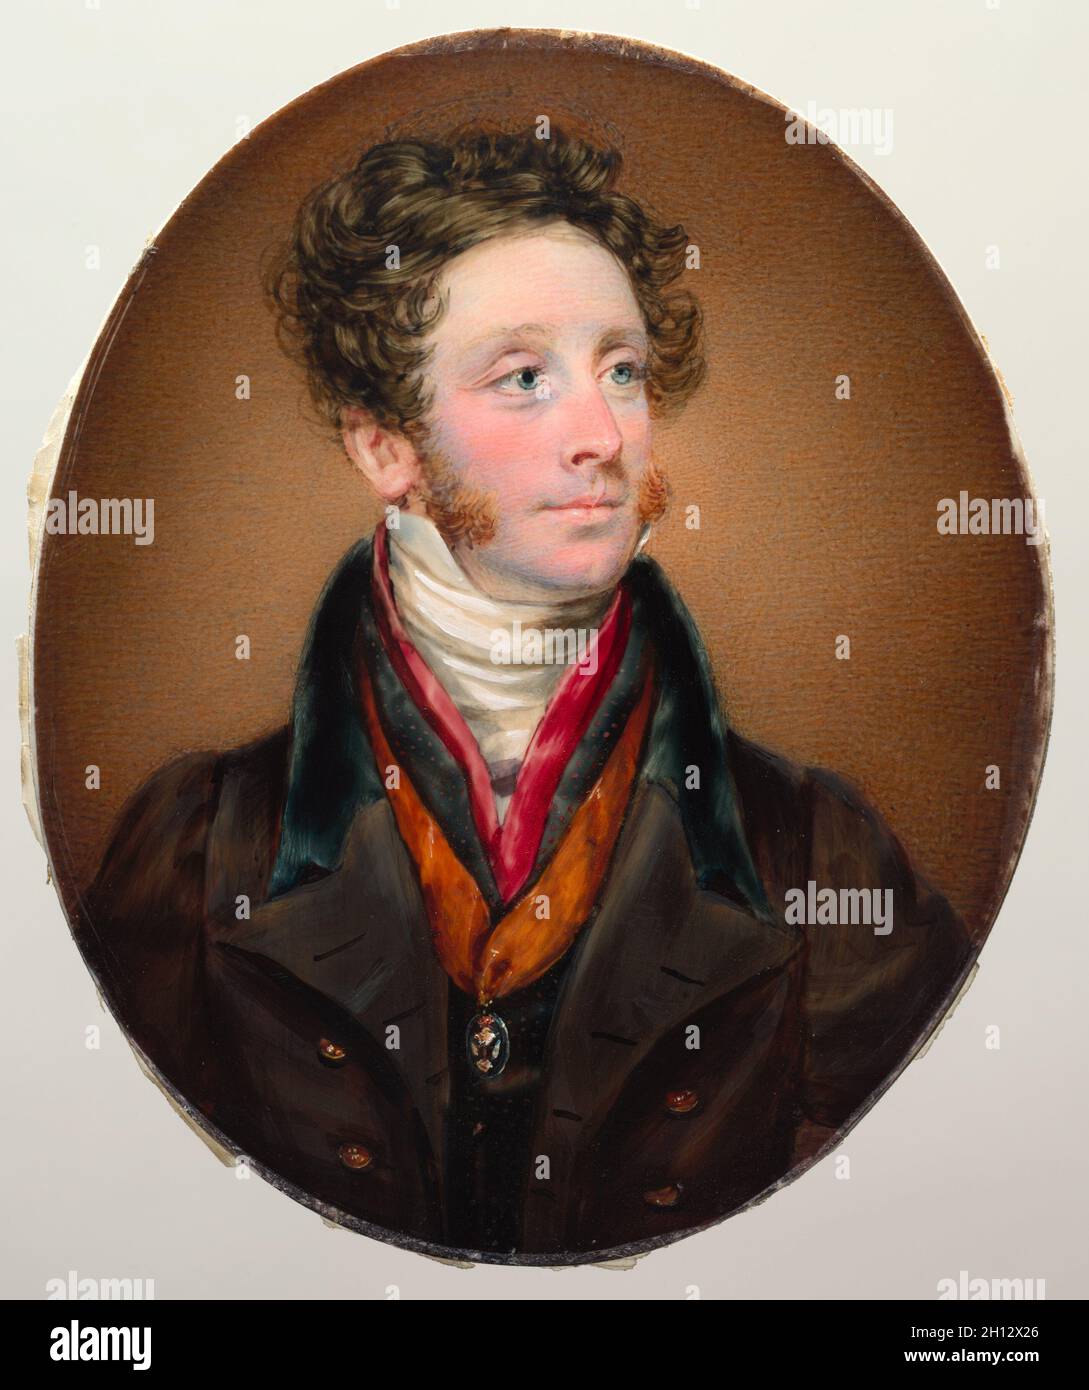 Portrait of John Francis Miller Erskine, Earl of Mar and Earl of Kellie, 1825. Kenneth Macleay (Scottish, 1802-1878). Watercolor on ivory; framed: 14.8 x 12.8 cm (5 13/16 x 5 1/16 in.); overall: 10 x 8 cm (3 15/16 x 3 1/8 in.). Stock Photo